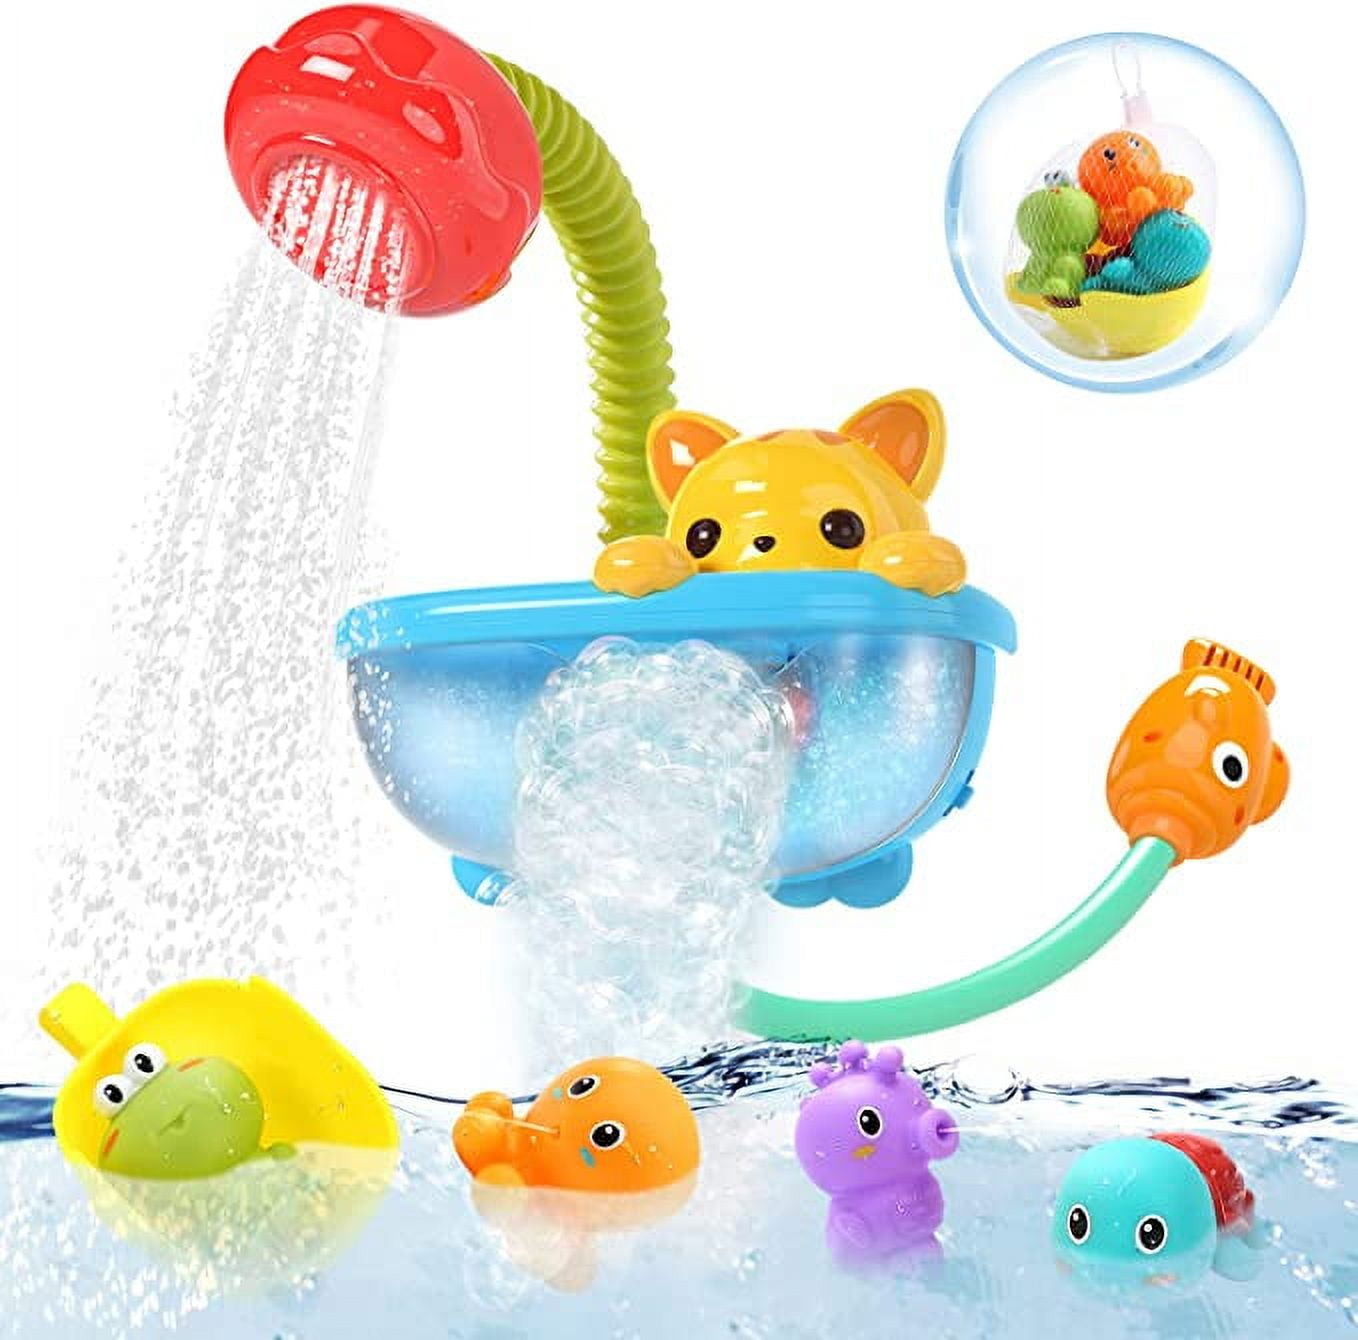 Dynaming 15 Pcs Baby Bath Toys, Toddlers Bathtub Water Pool Toy Floating  Boats Stacking Cups Cute Animals for Bathroom 1 2 3 Years Kids Gifts